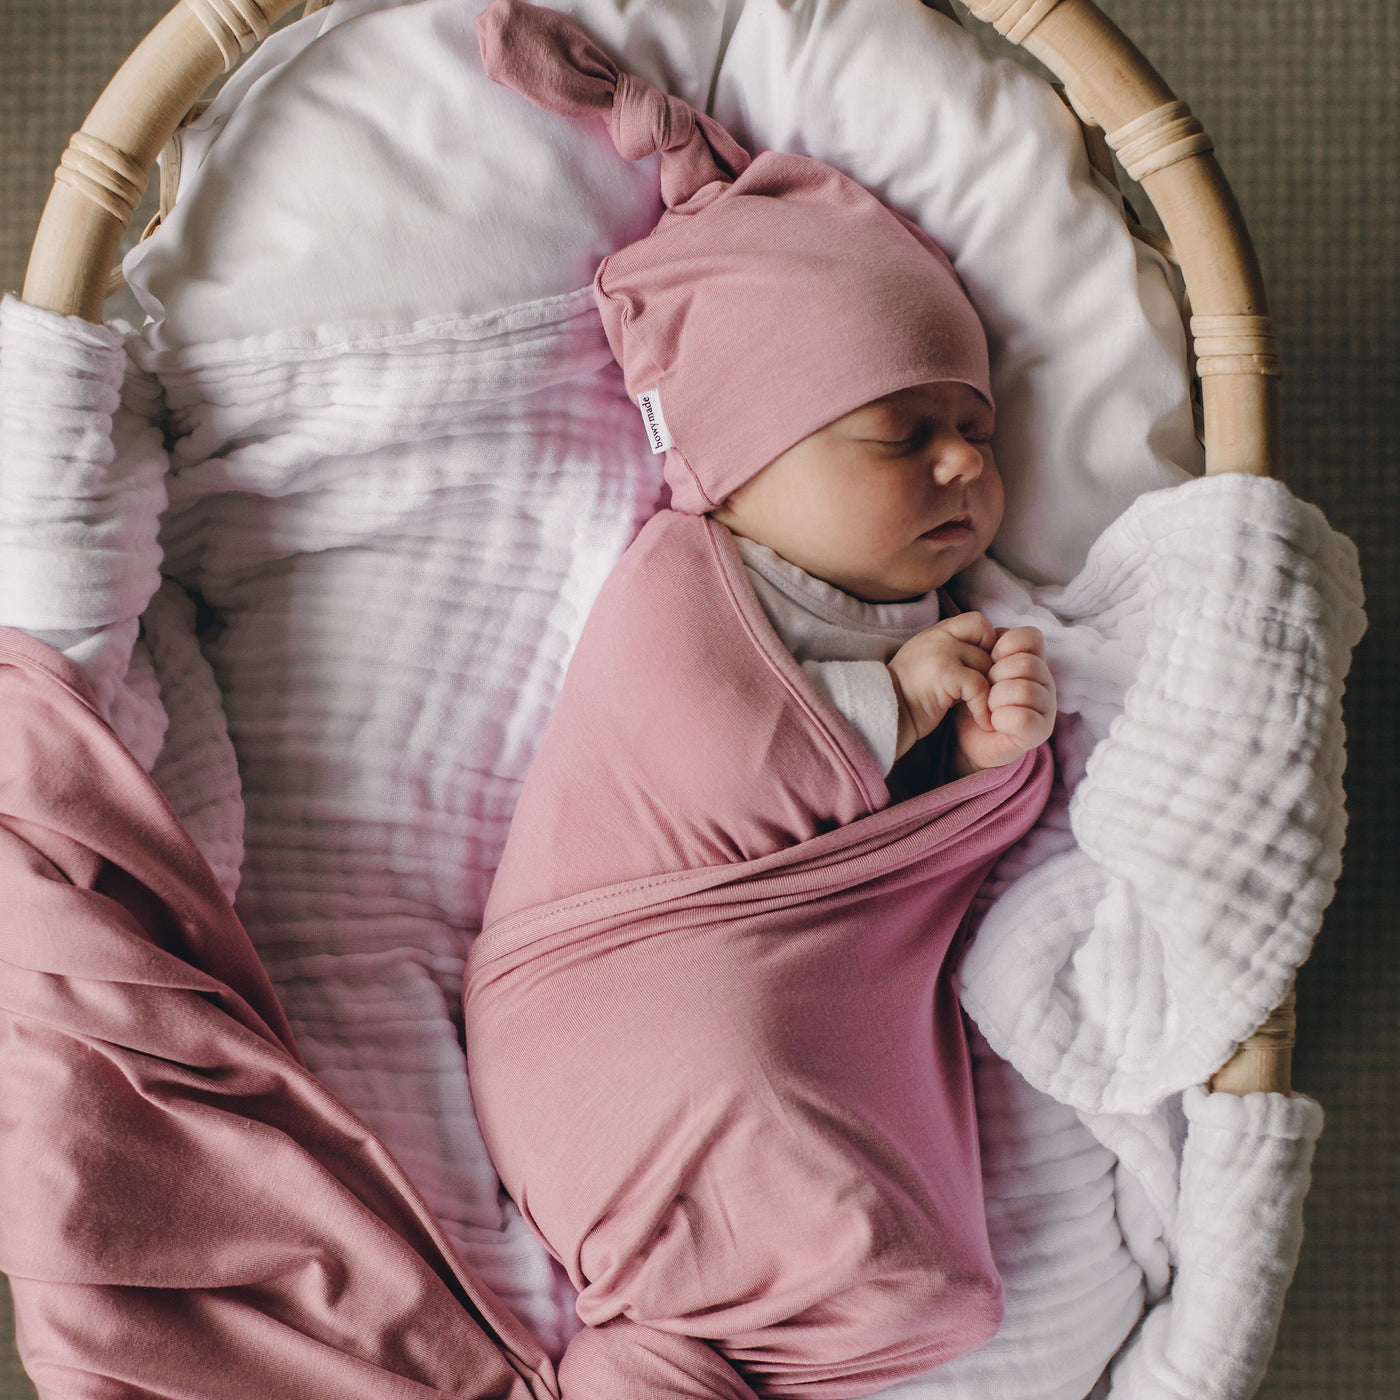 Cute bubb sleeping in bassinet wearing matching pink swaddle and top knot beanie